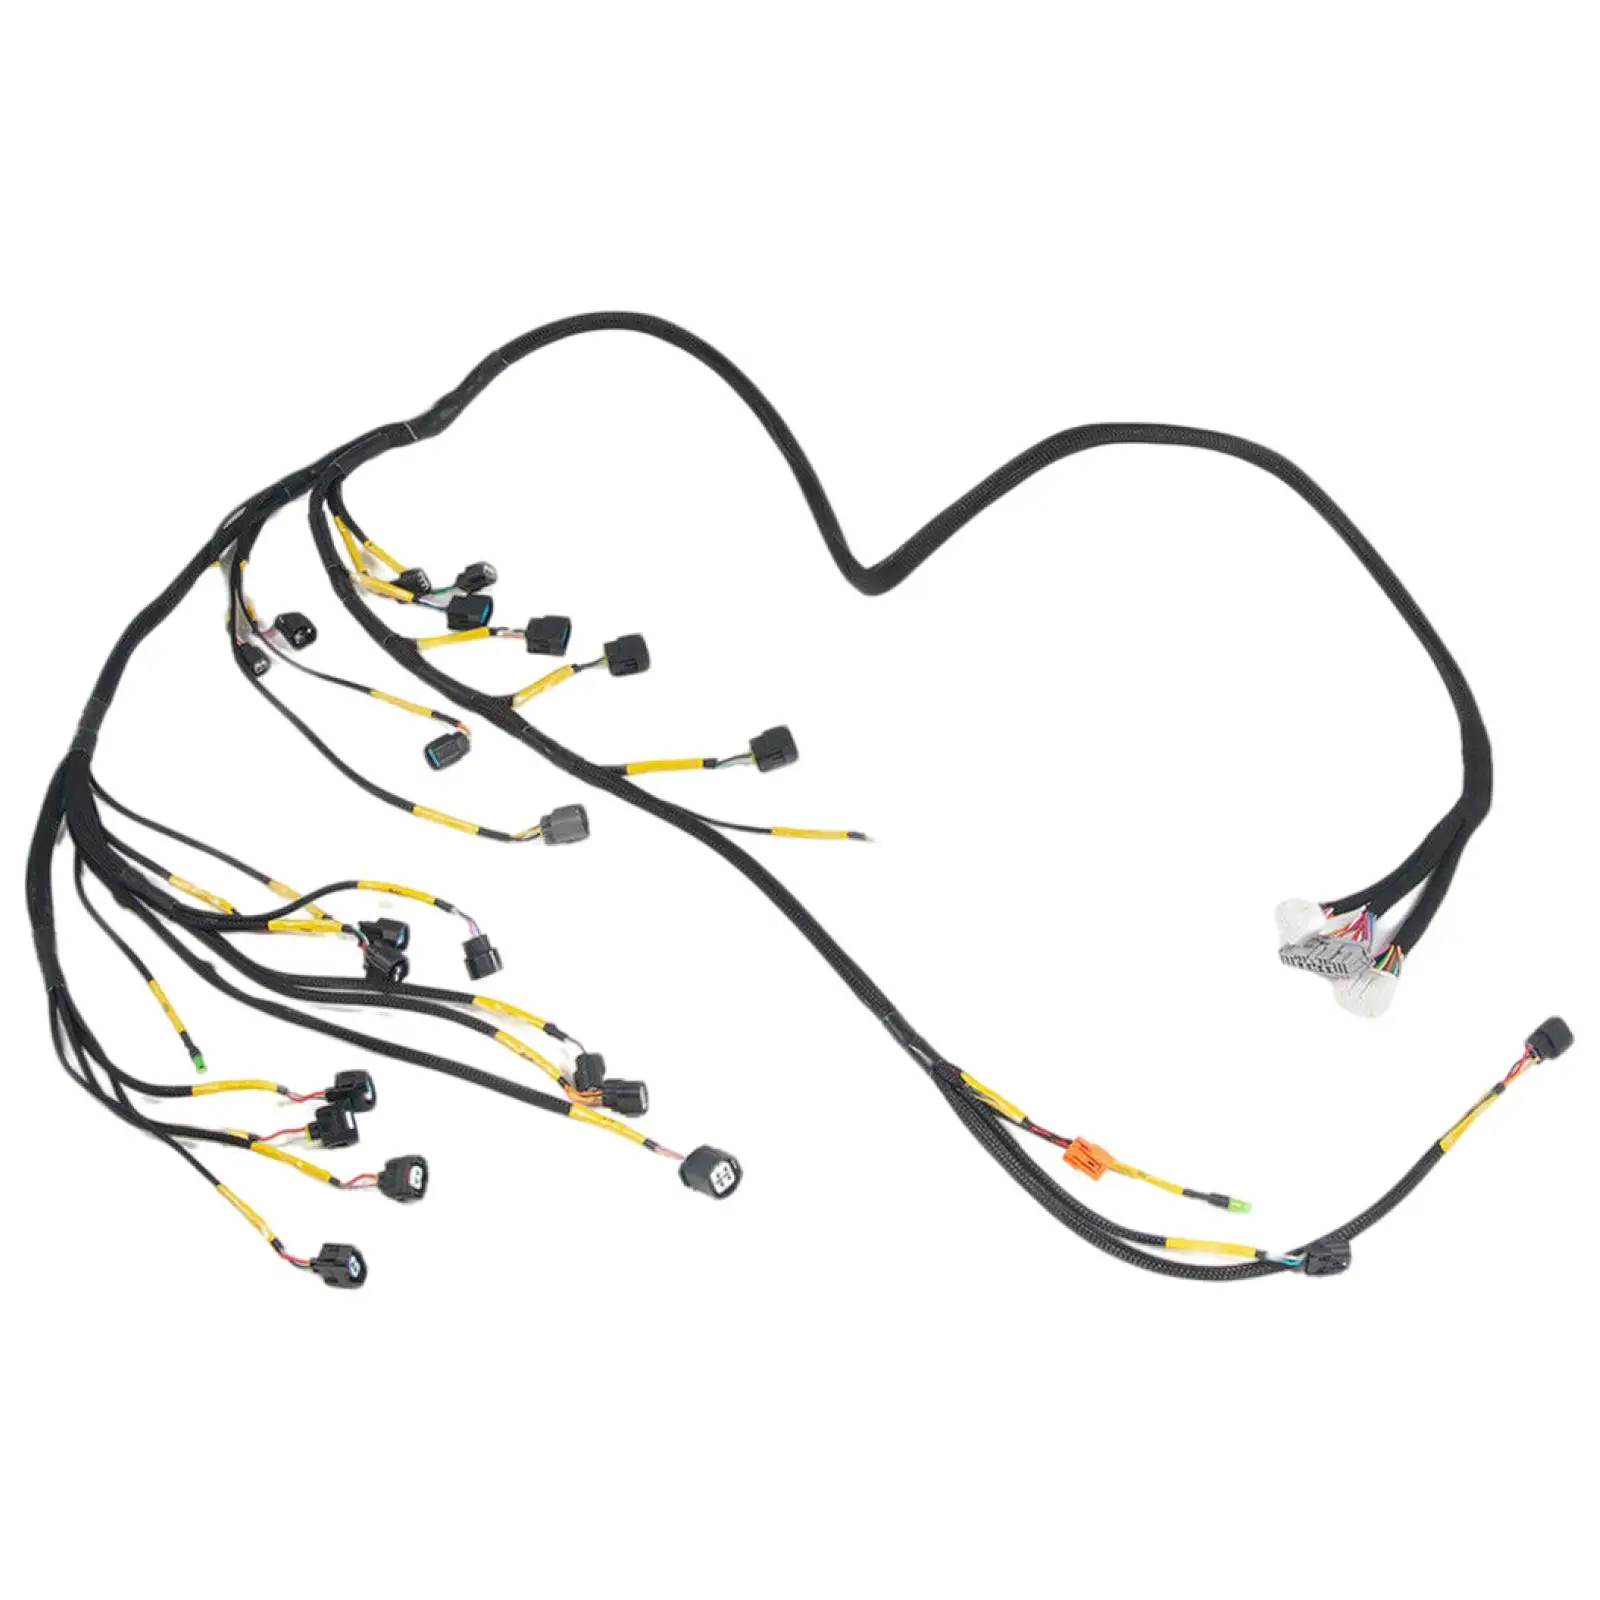 K20 K24 K Series Tucked Engine Harness Fits for K Swap for RSX Type S for RSX Base